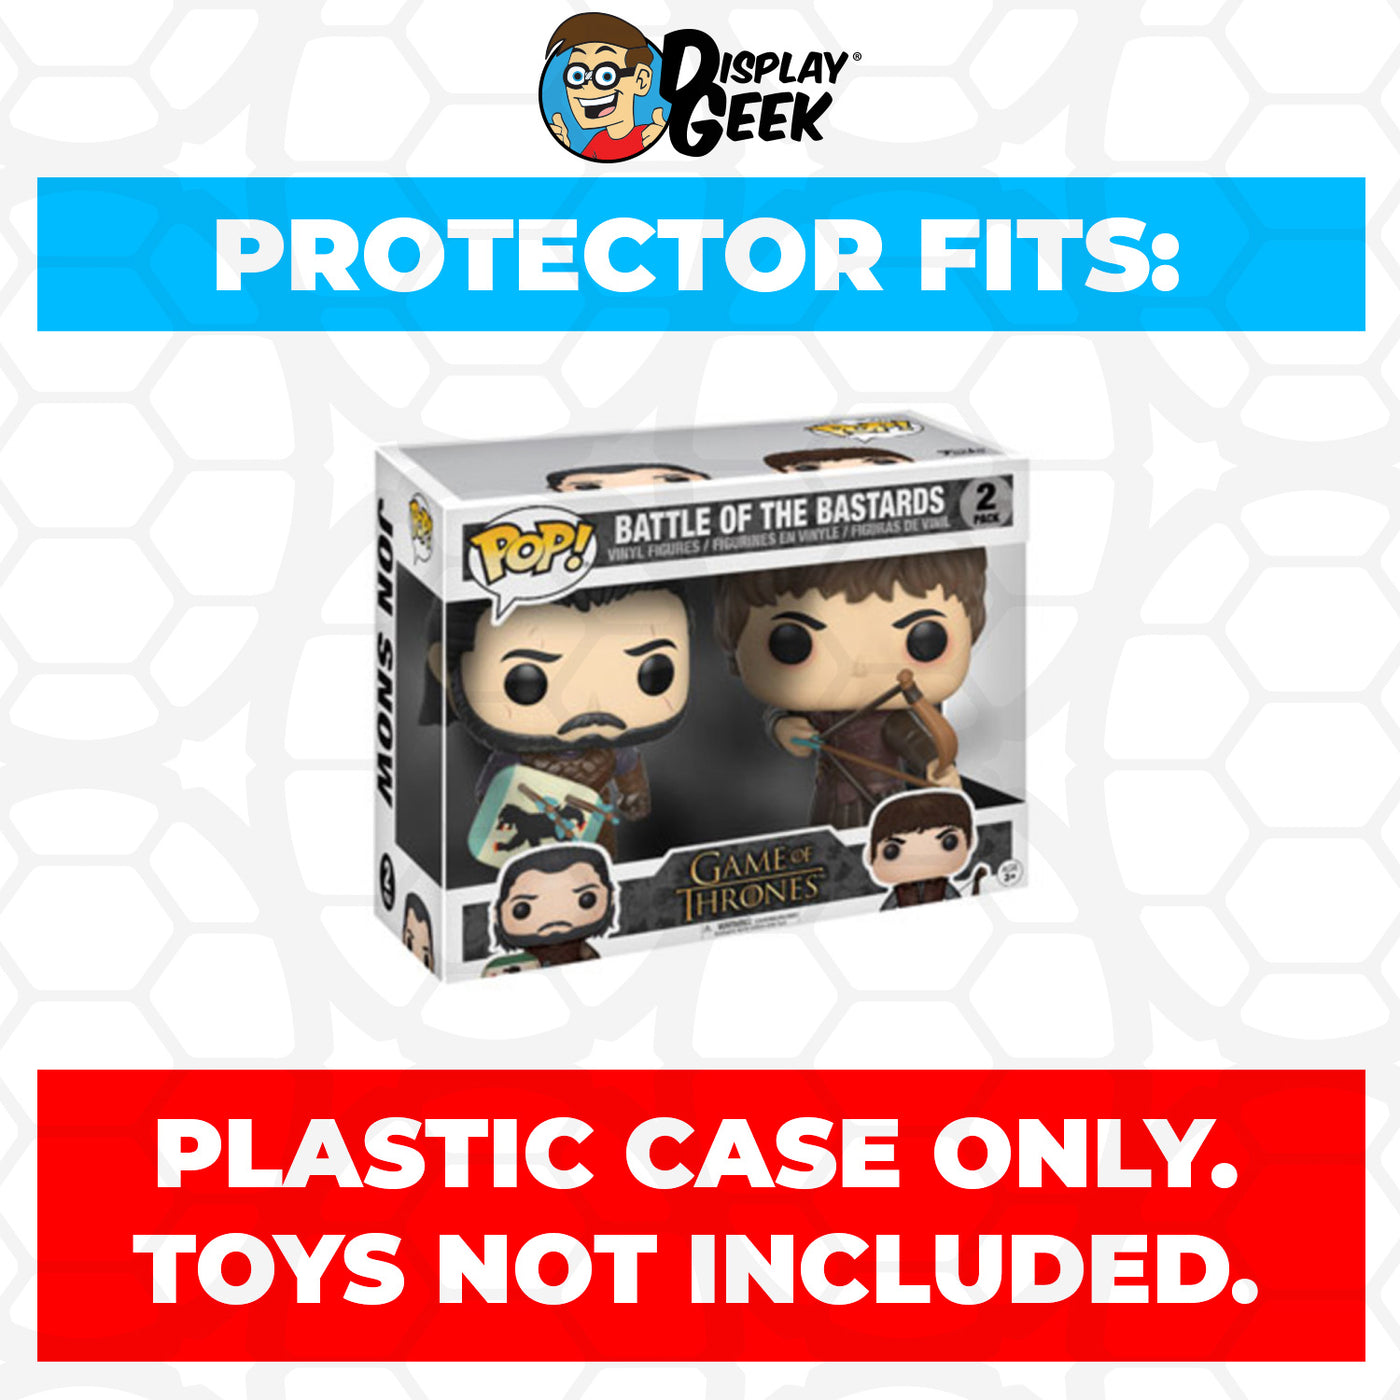 Pop Protector for 2 Pack Battle of the Bastards Funko Pop on The Protector Guide App by Display Geek